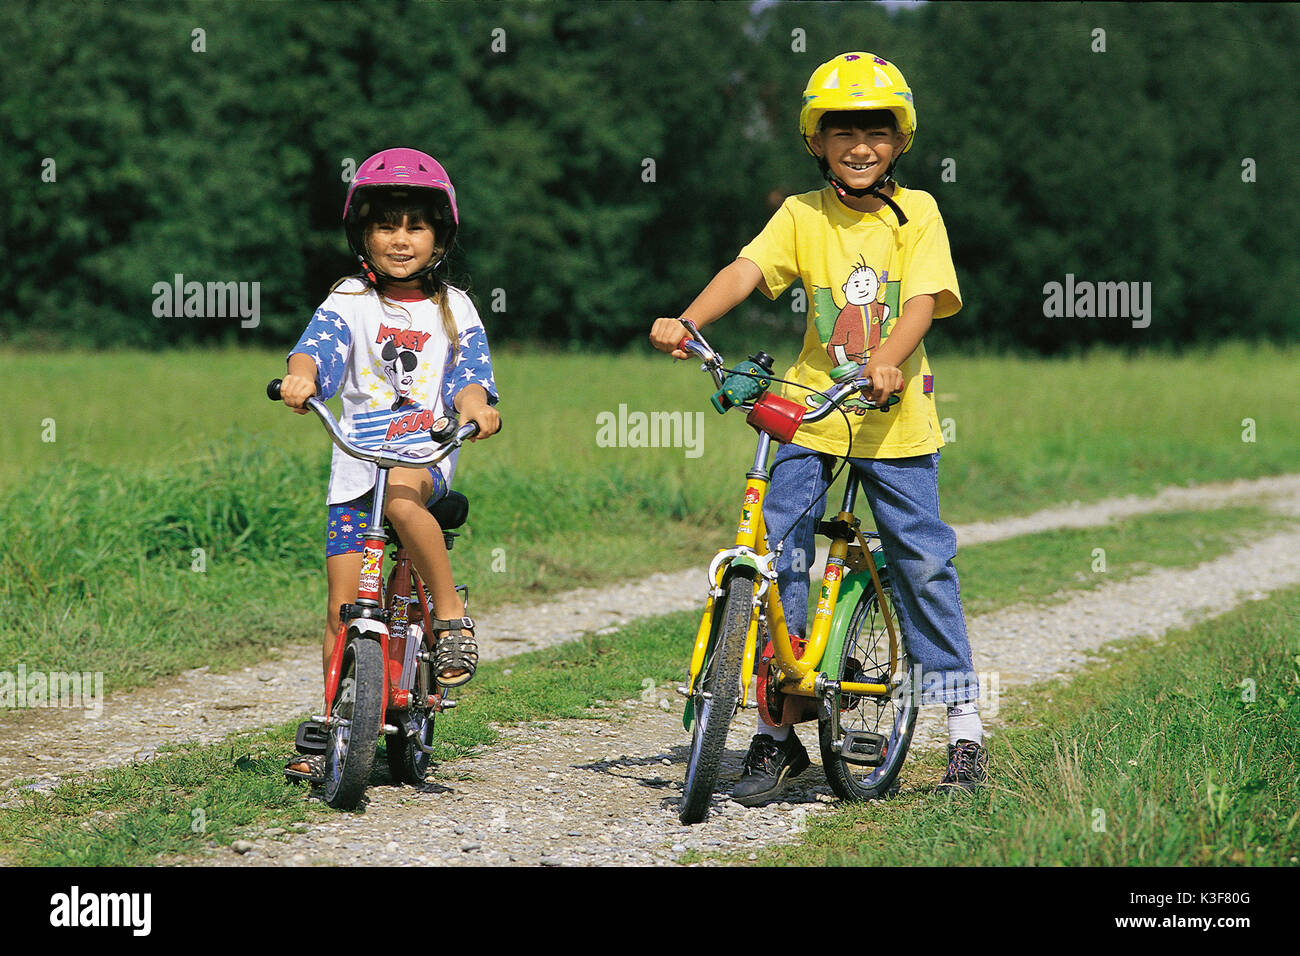 Two children by bicycle on a country lane Stock Photo